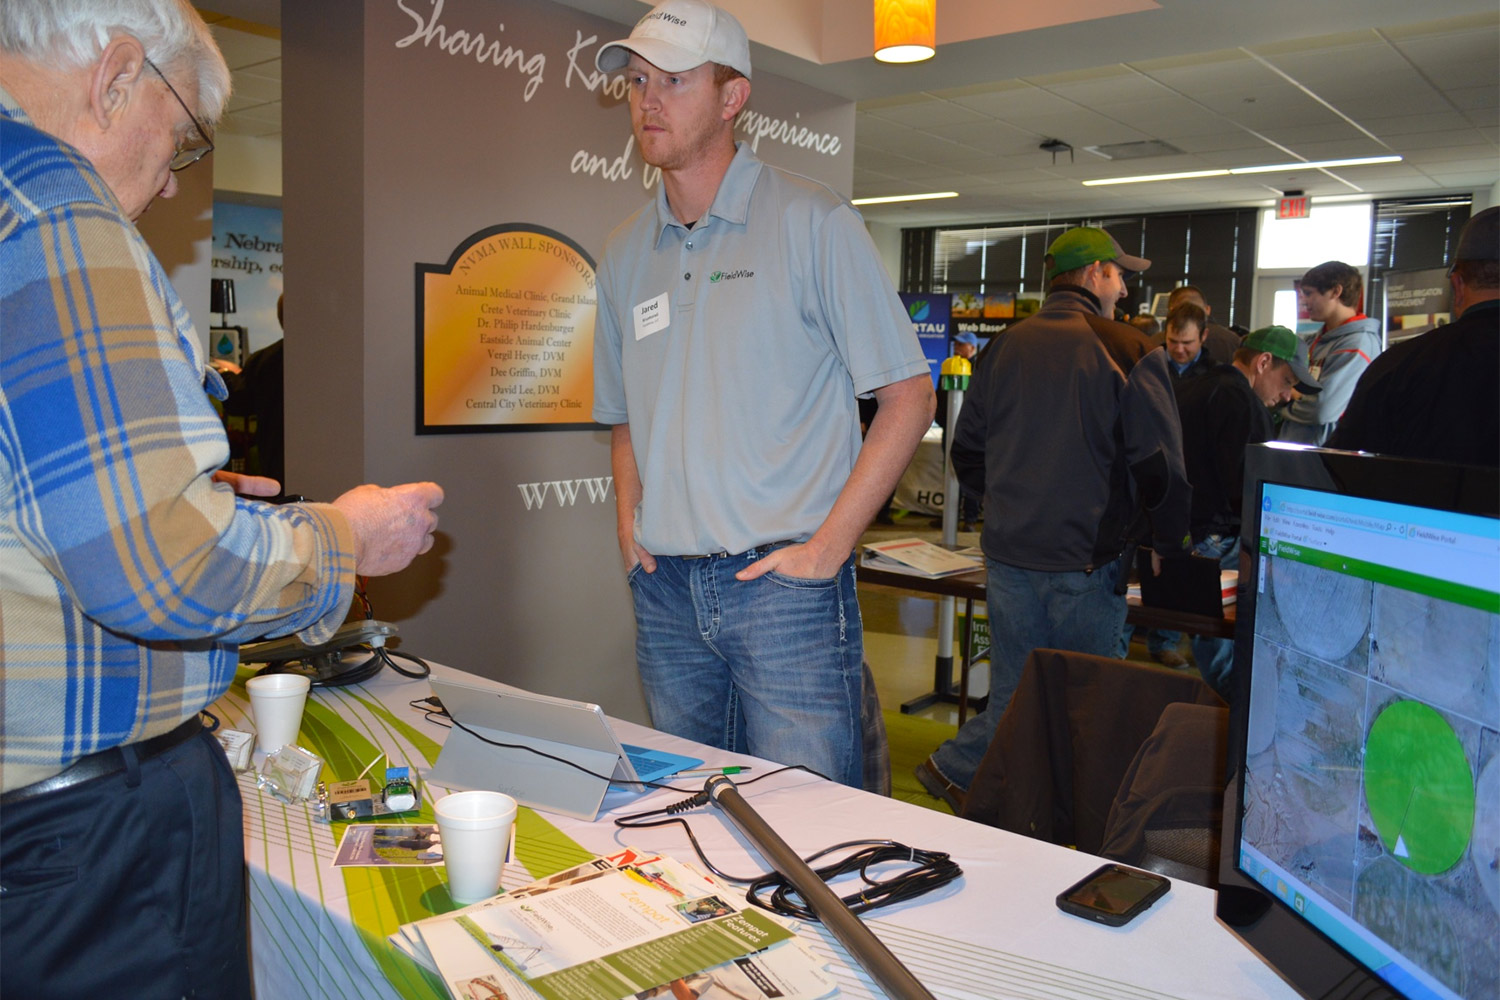 Ted Tietjen of Grant, Neb., discusses irrigation technology and tools with Jared Kruntorad, Ewing, Neb., sales manager of FieldWise LLC, during the 2015 irrigation management conference at NCTA in Curtis. (NCTA photo)